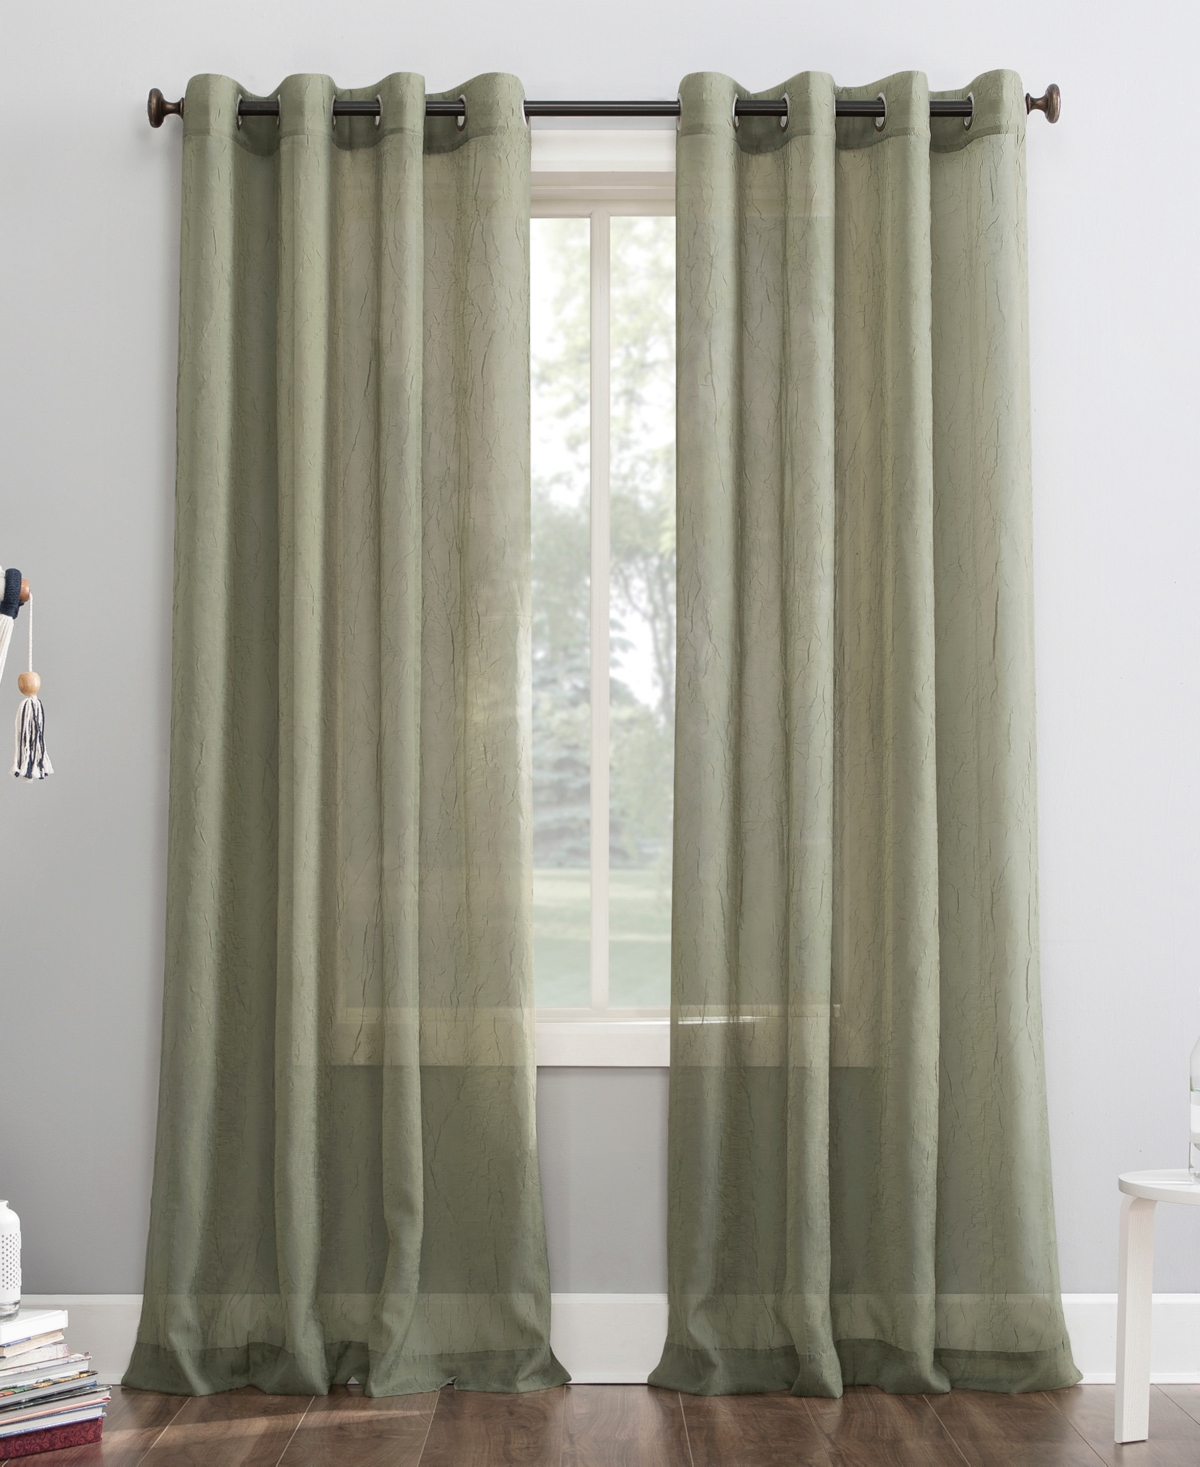 No. 918 Erica Crushed Voile Sheer Grommet Single Curtain Panel, 51" X 63" In Willow